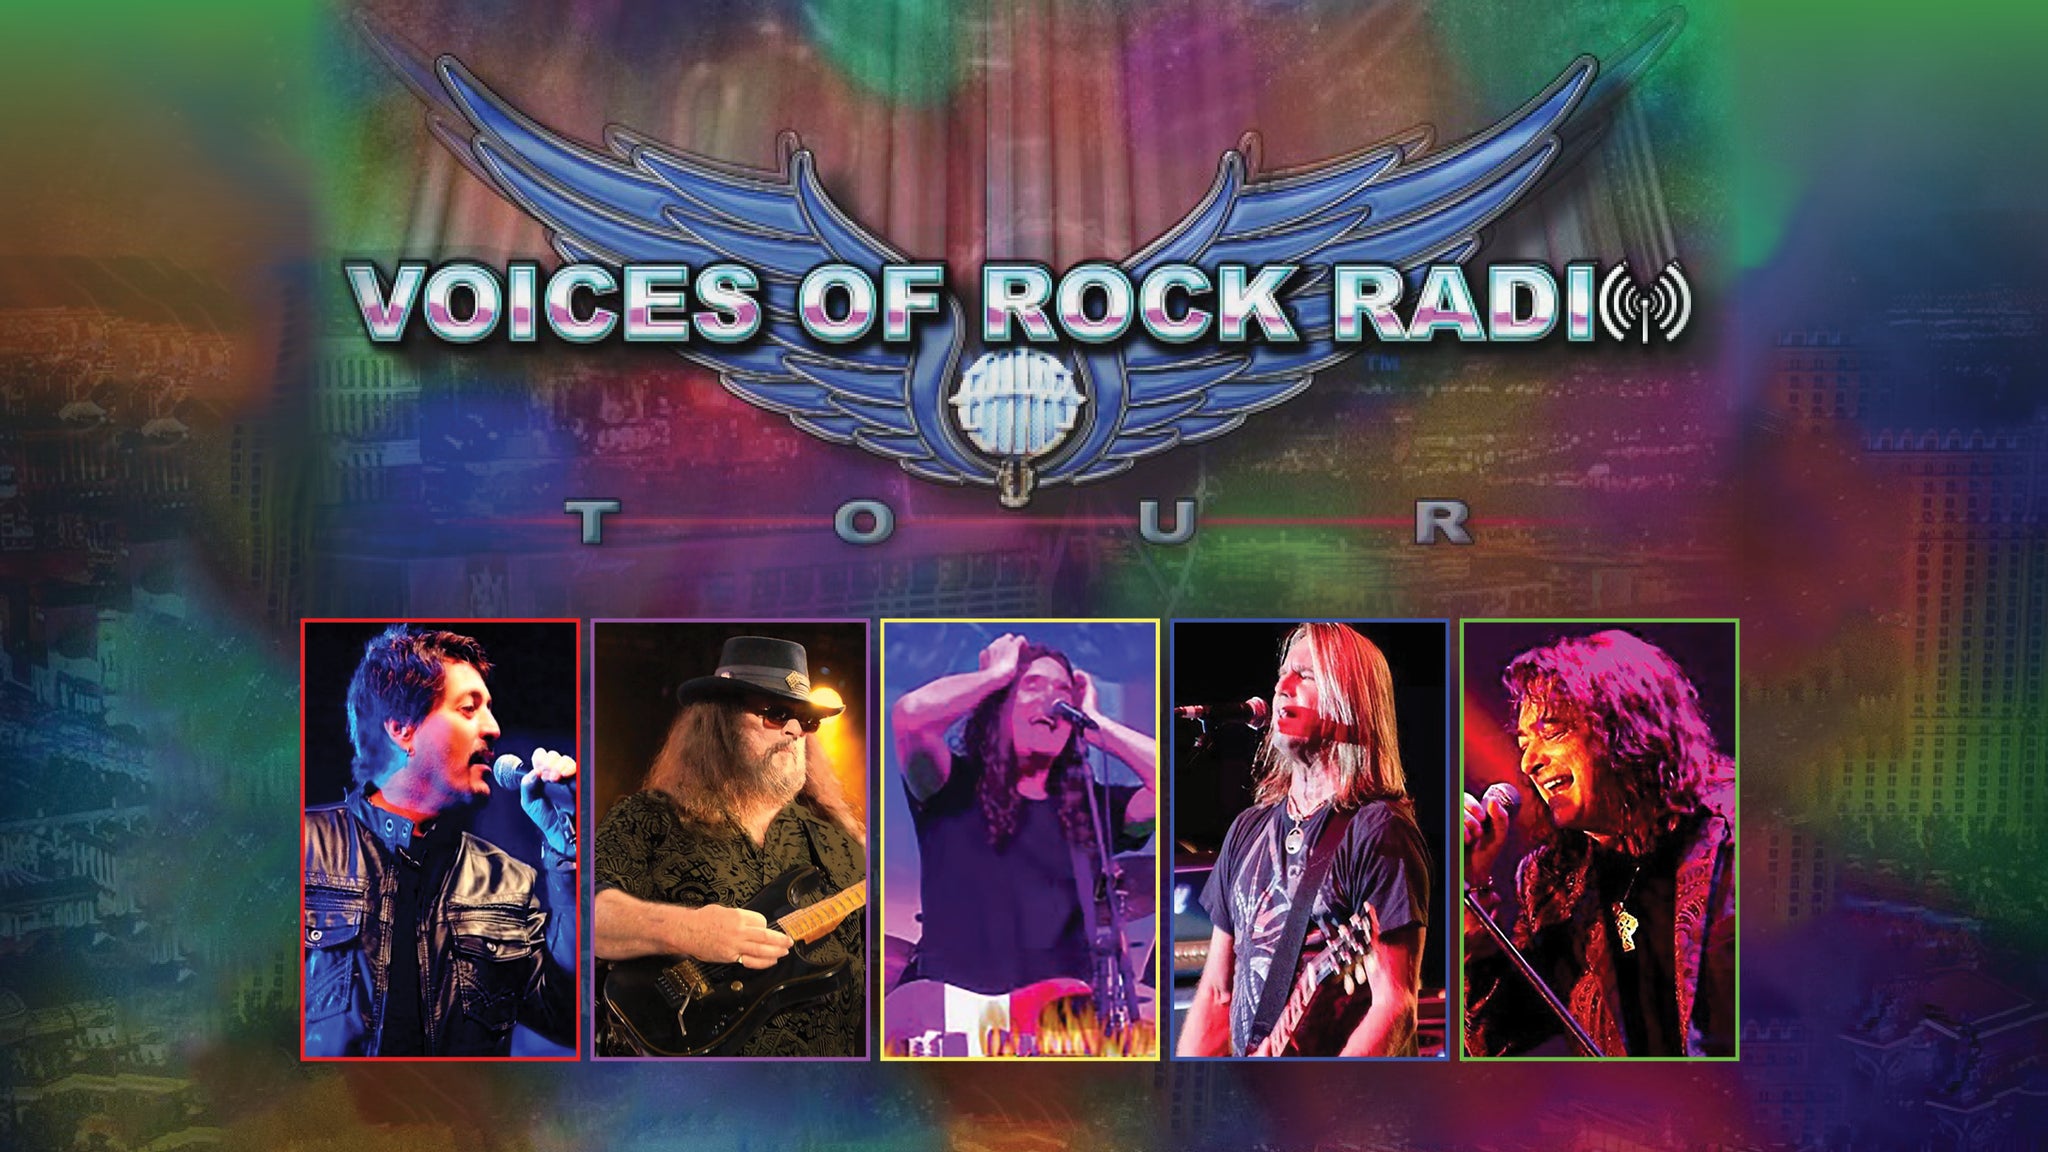 Heart City Health- Heart Beat of The City Presents: The Voices of Rock